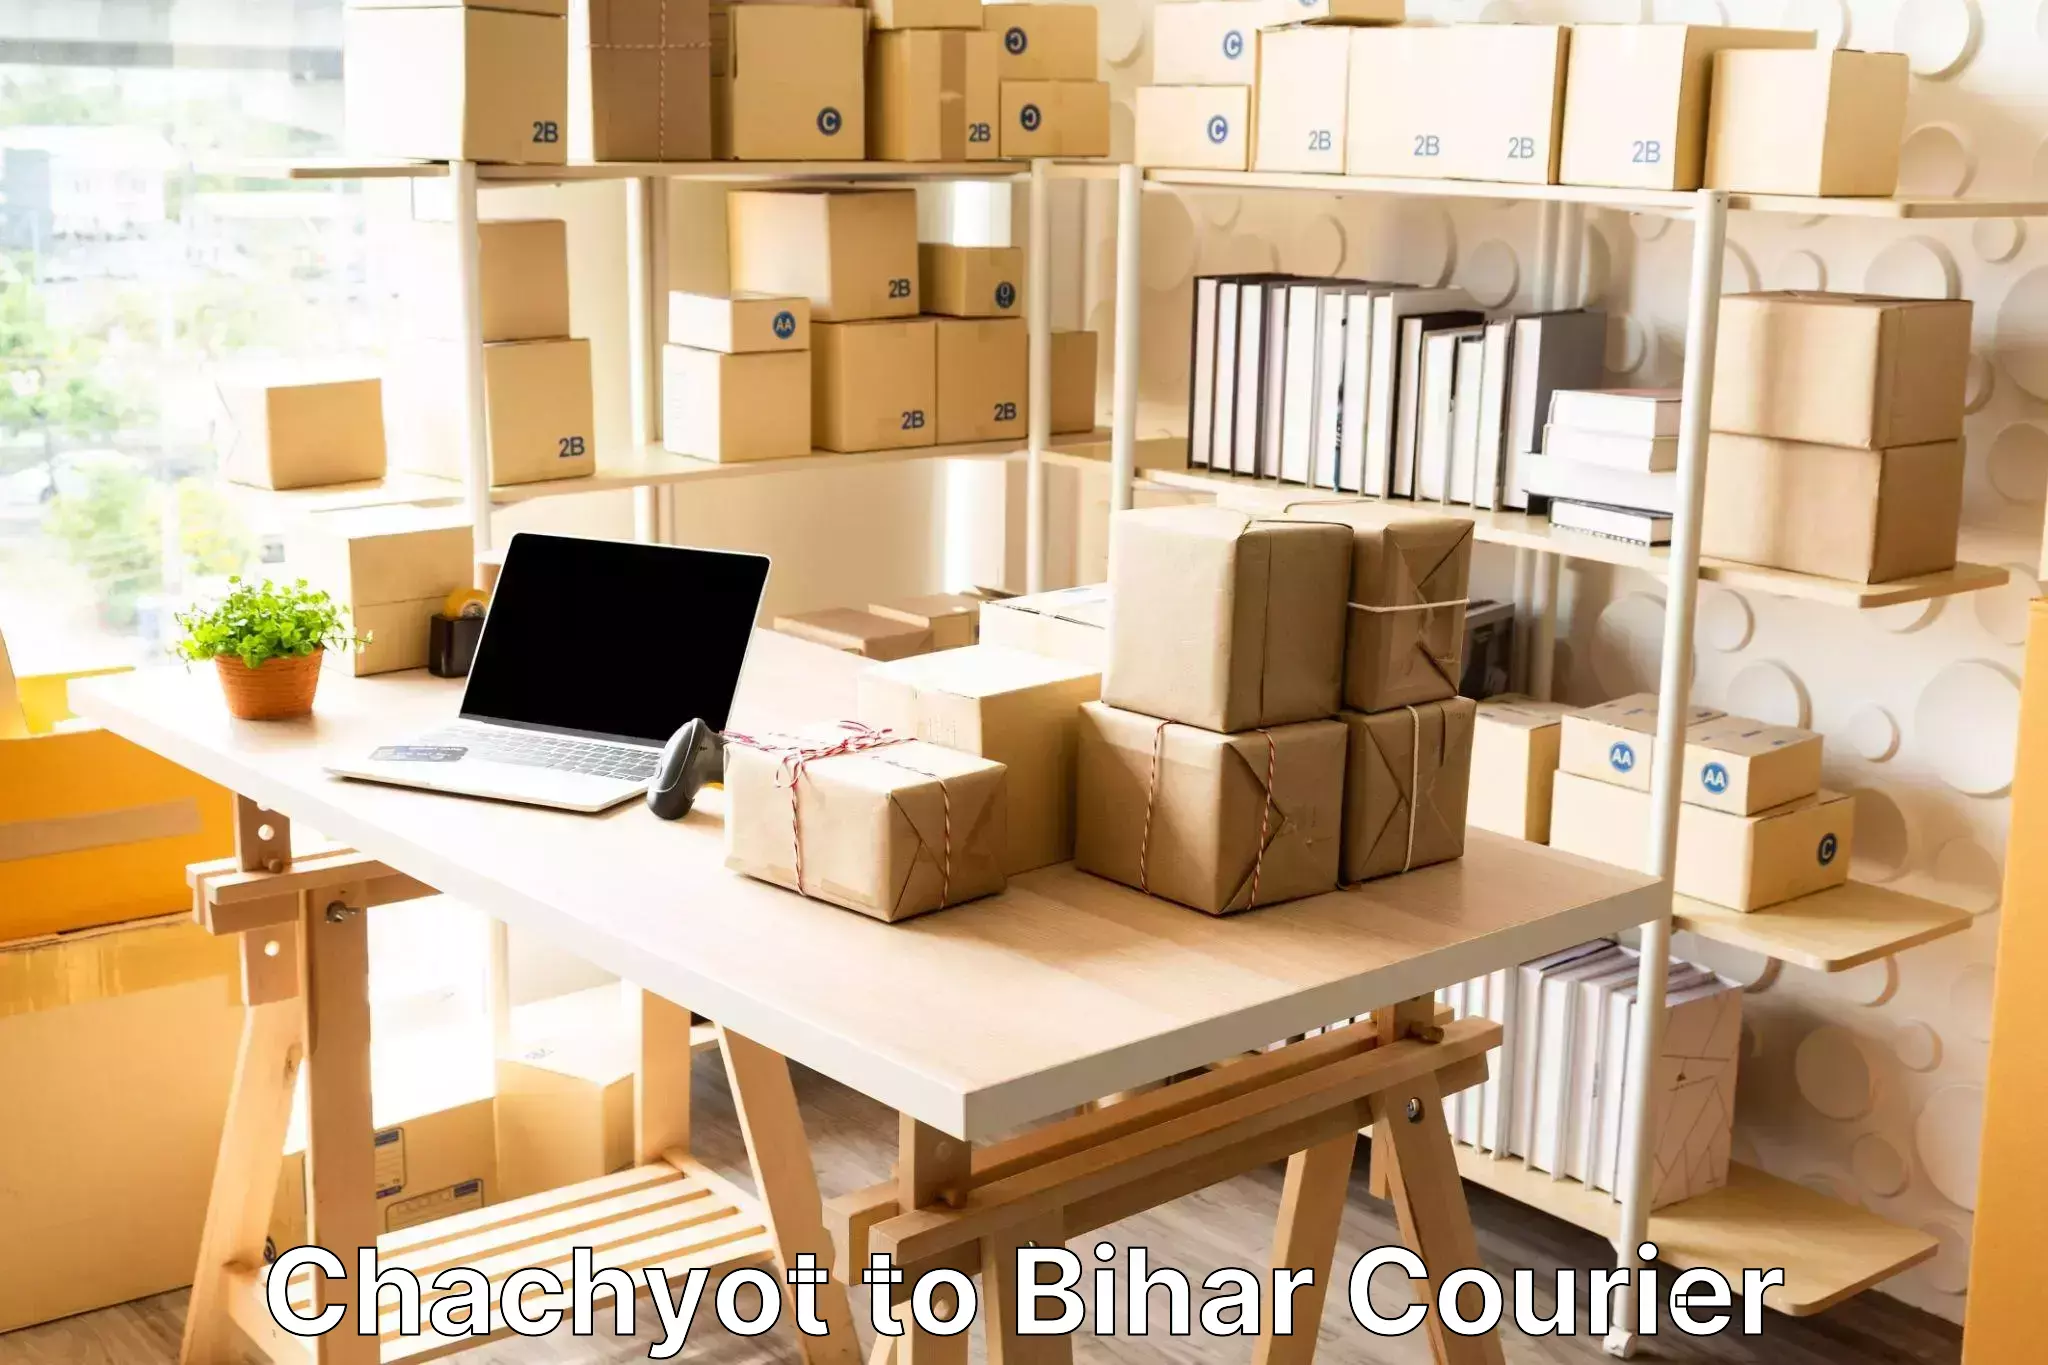 Urgent luggage shipment Chachyot to Bihar